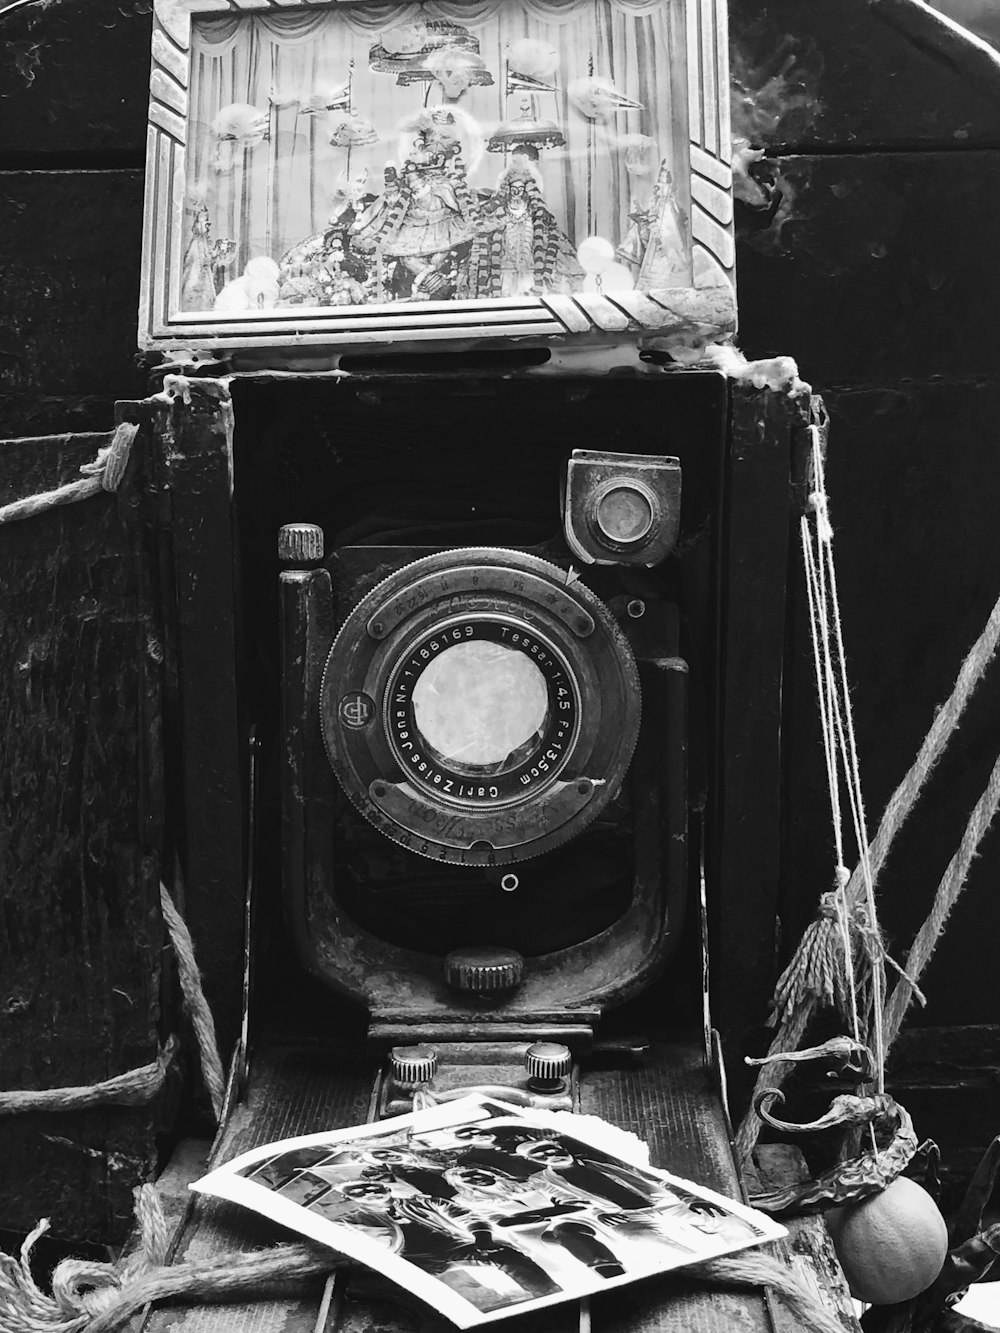 black and silver camera on black and white surface